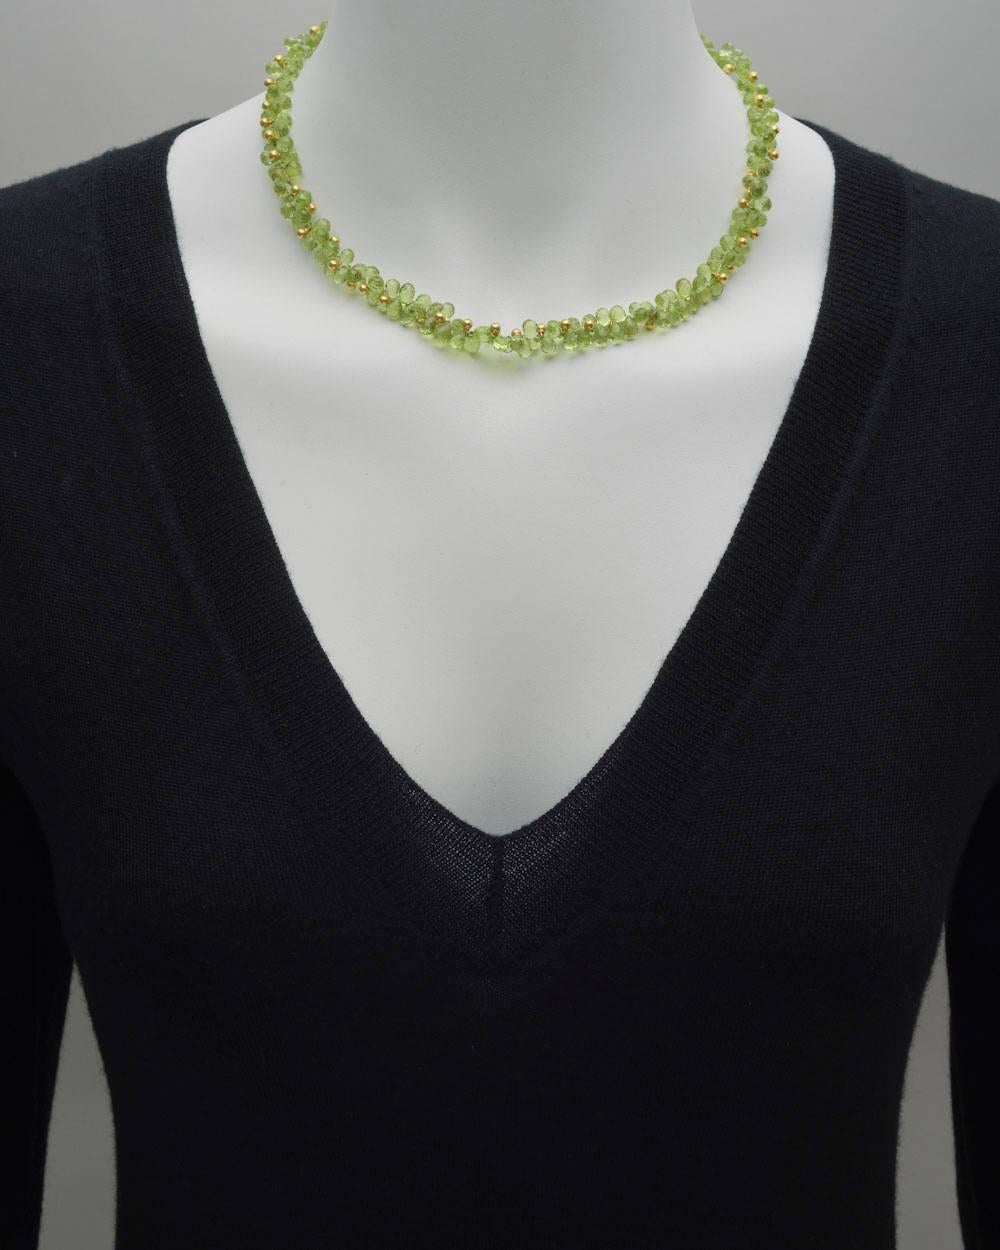 Briolette-cut peridot bead and 18k yellow gold bead collar necklace, secured by an 18k yellow gold toggle clasp, signed Marya Dabrowski. 17.5